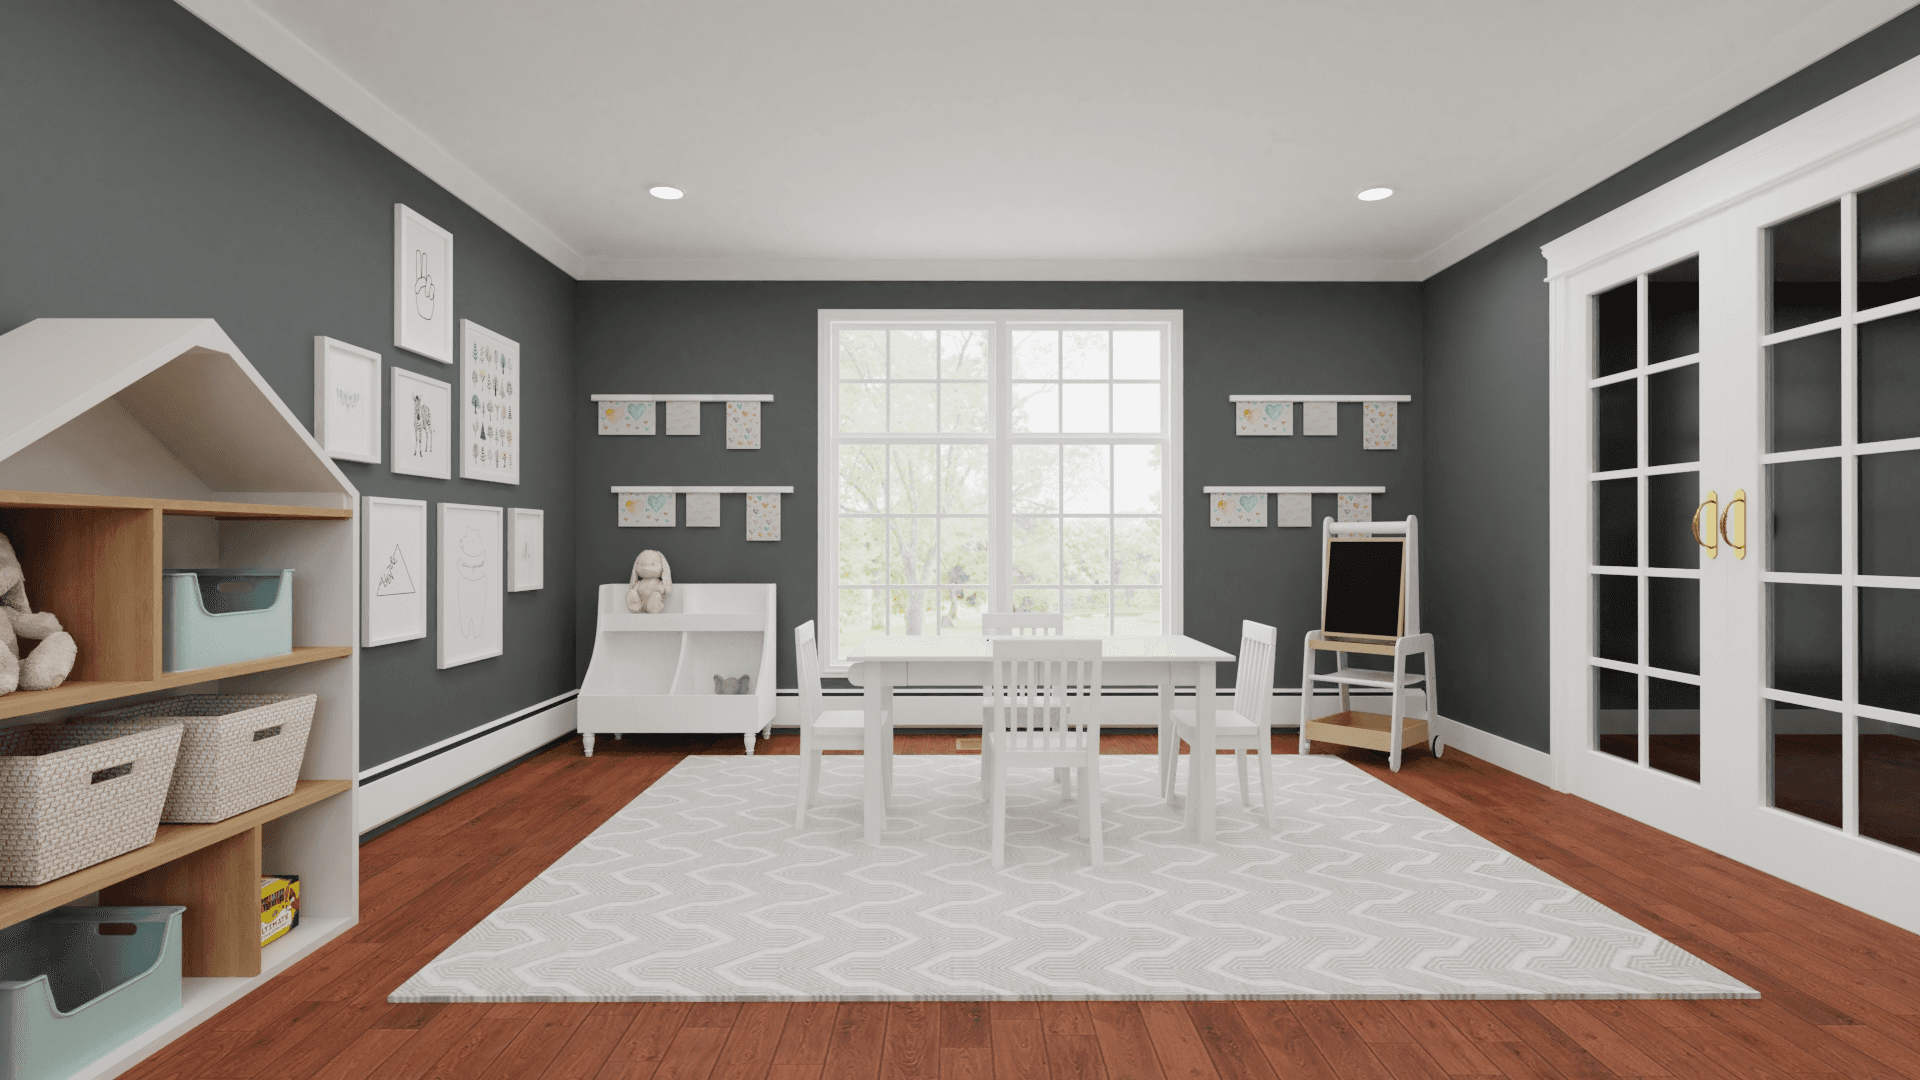 An Organized Playroom With Storage And A Cozy Lounge Area